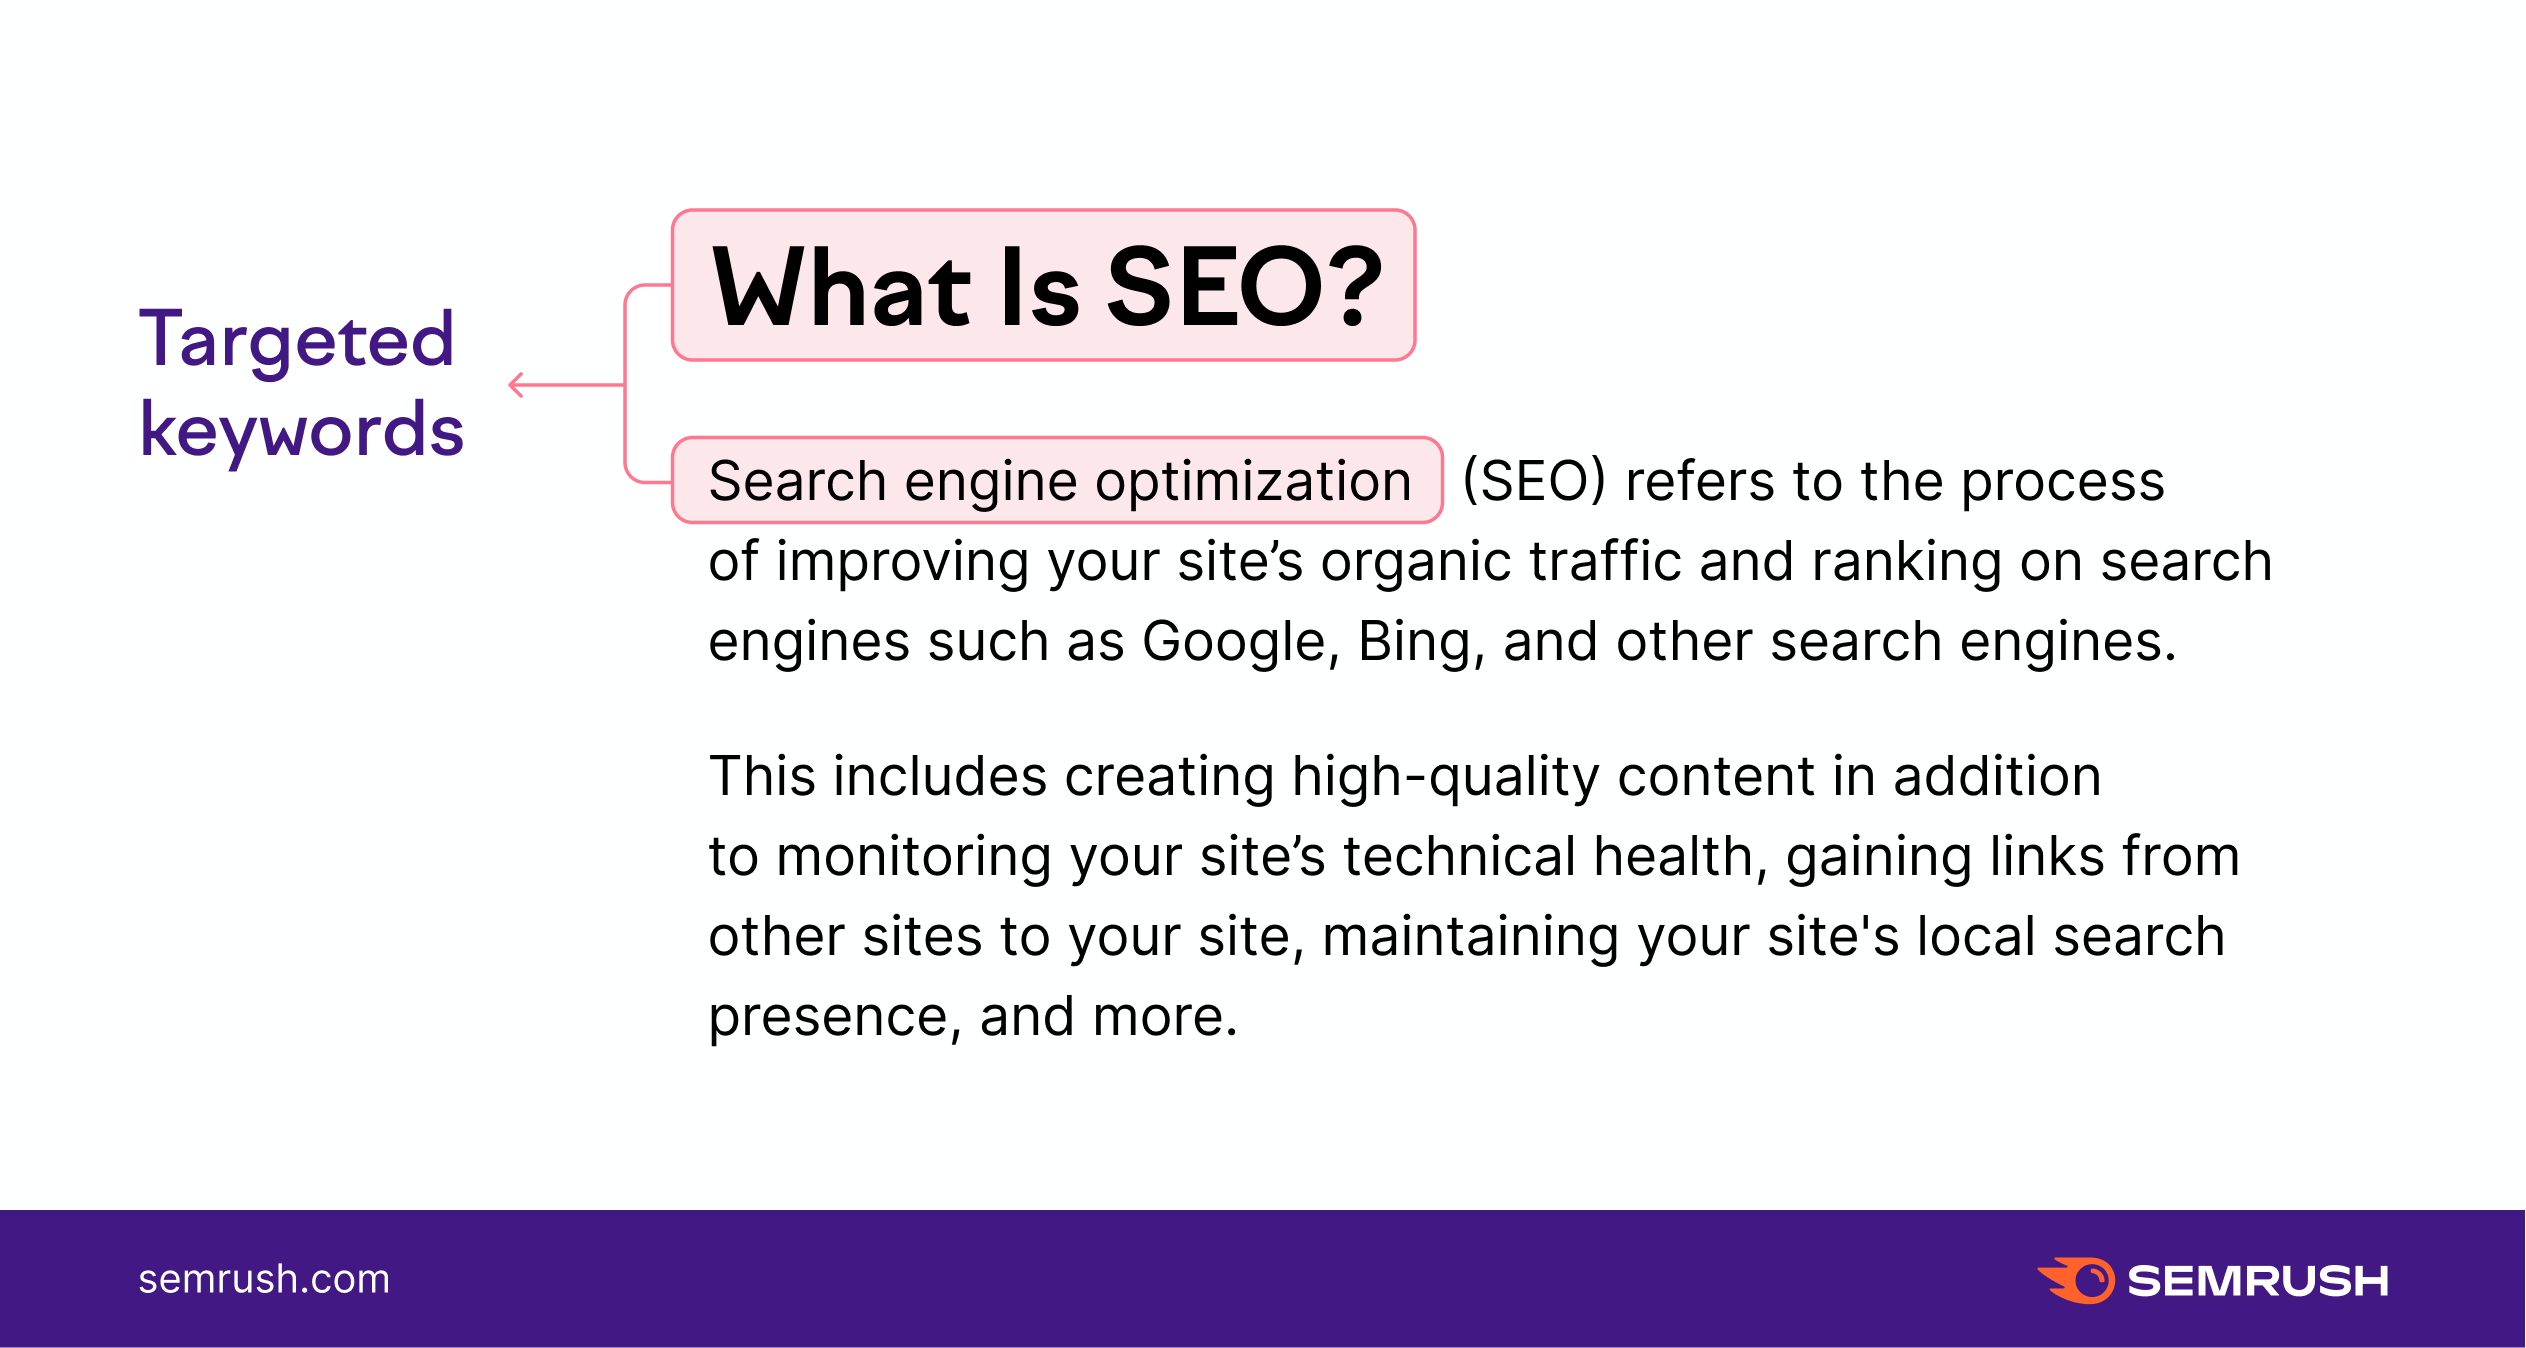 How can I become SEO Expert in 2022?